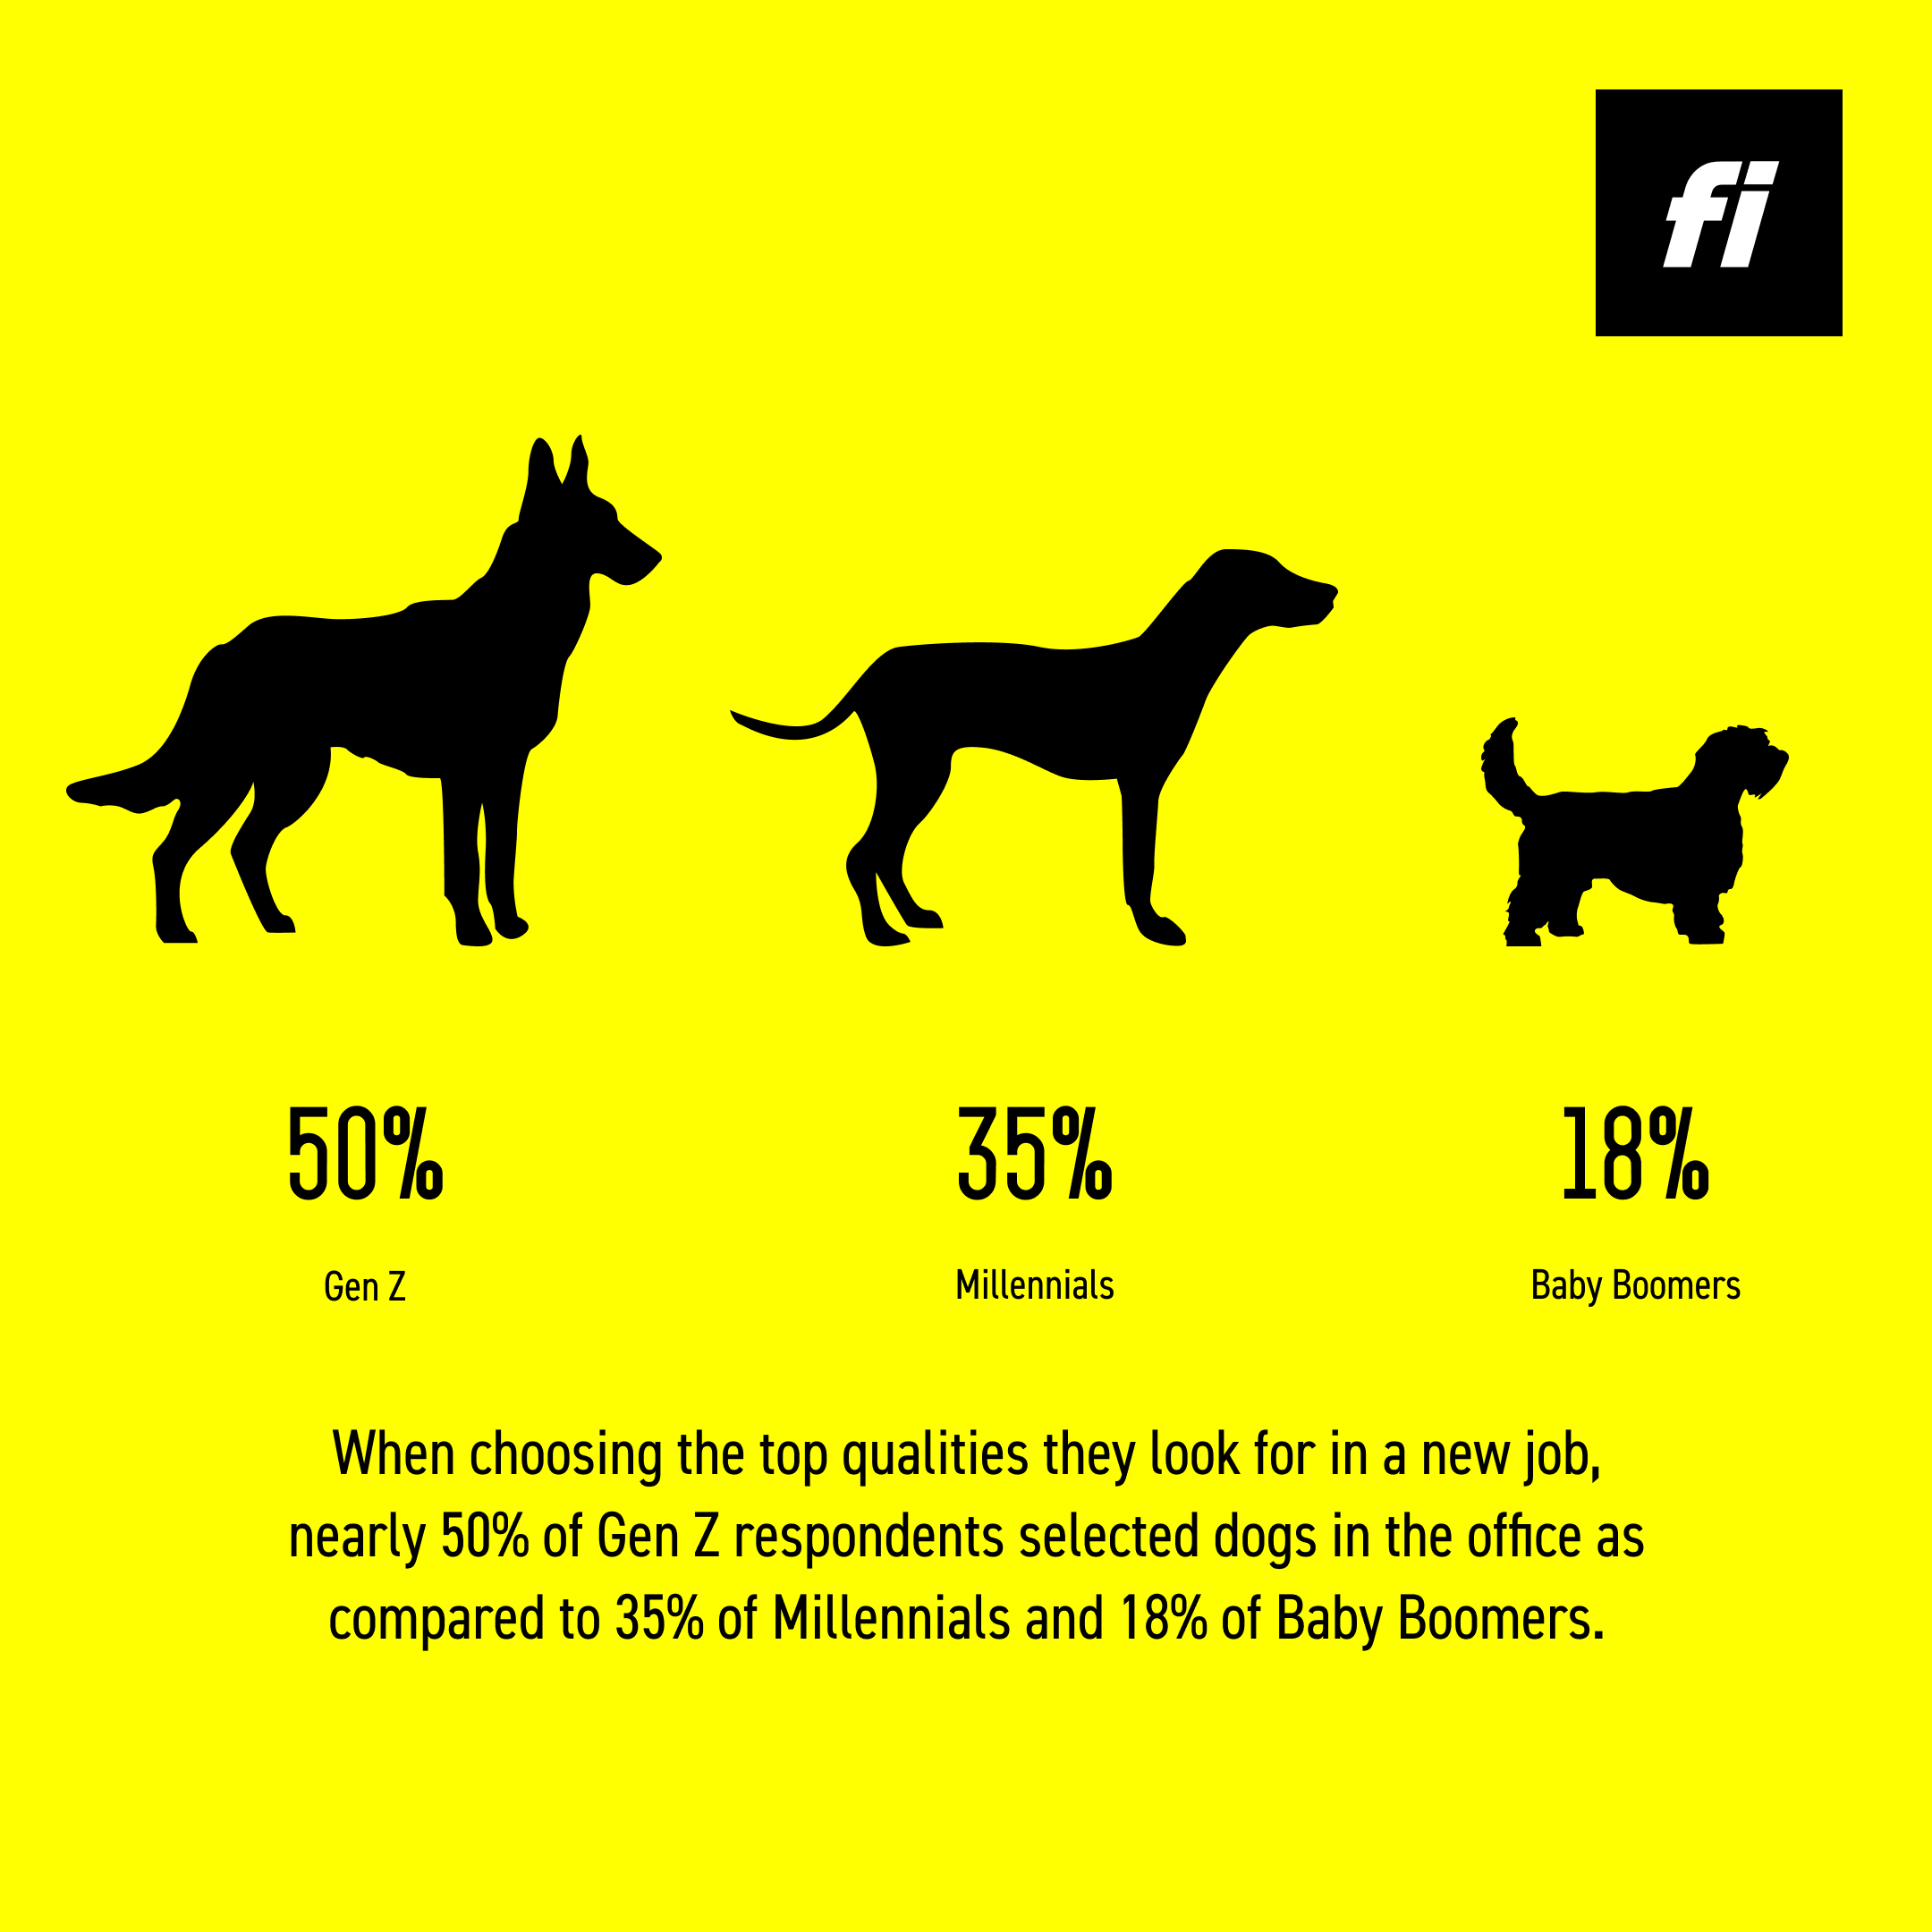 50% of Gen Z vs. 35% of Millennials vs. 18% of Baby Boomers selected dogs in the office as a top quality they look for in a new job